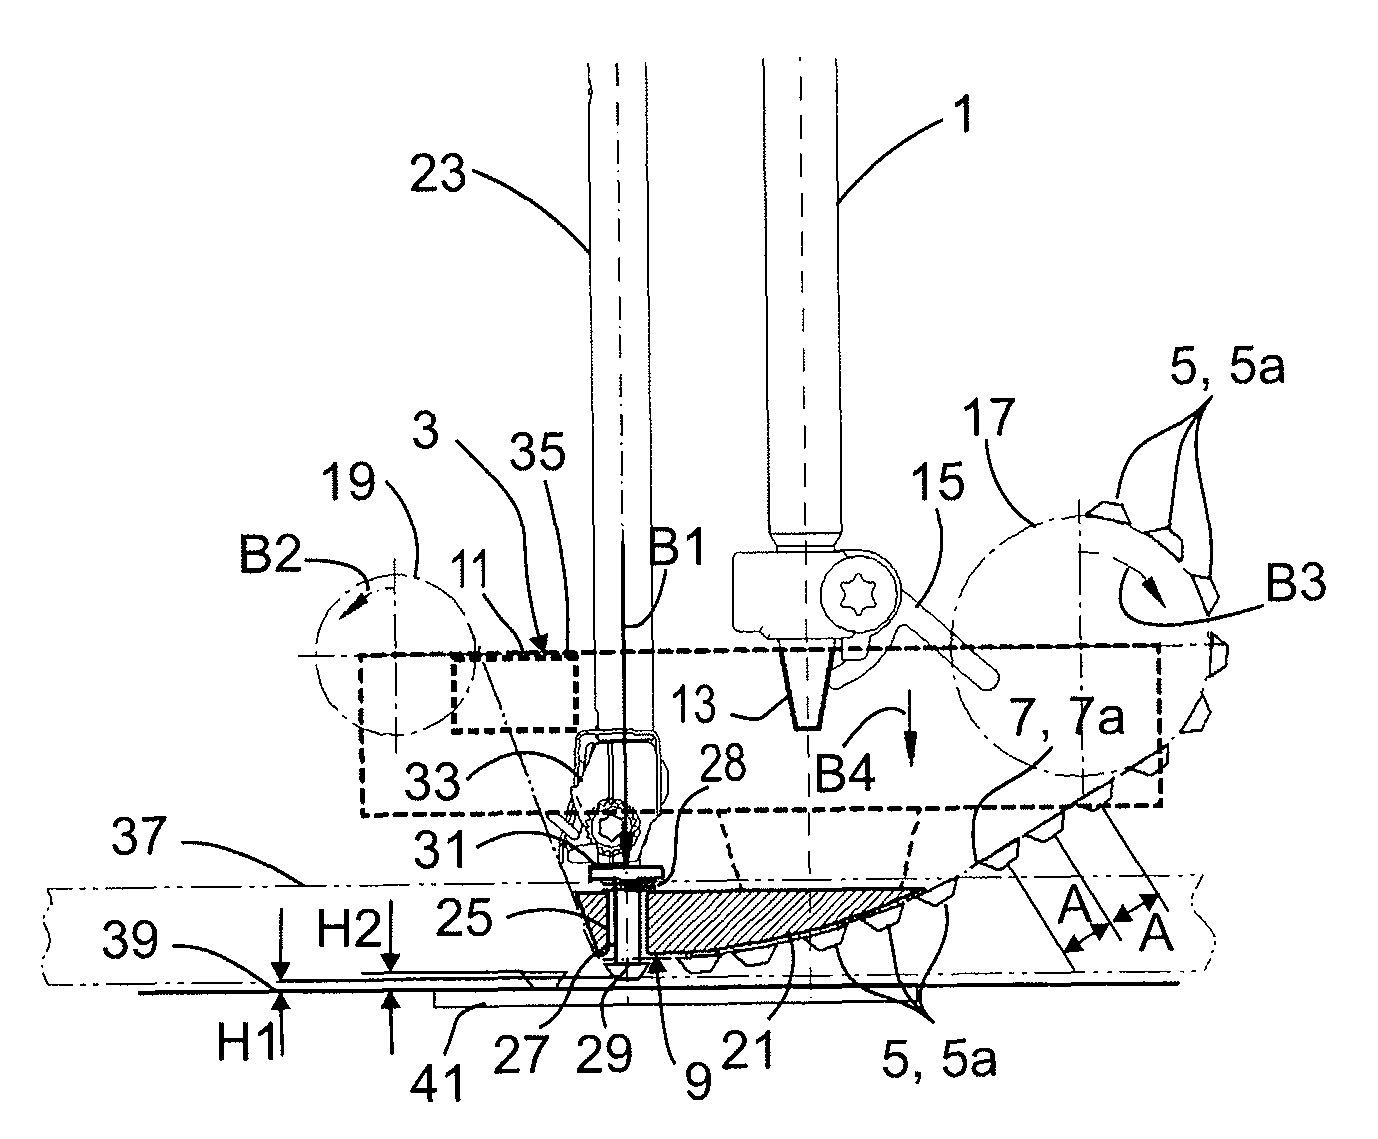 Placement device for placing decorative elements on a textile or non-textile sheet material